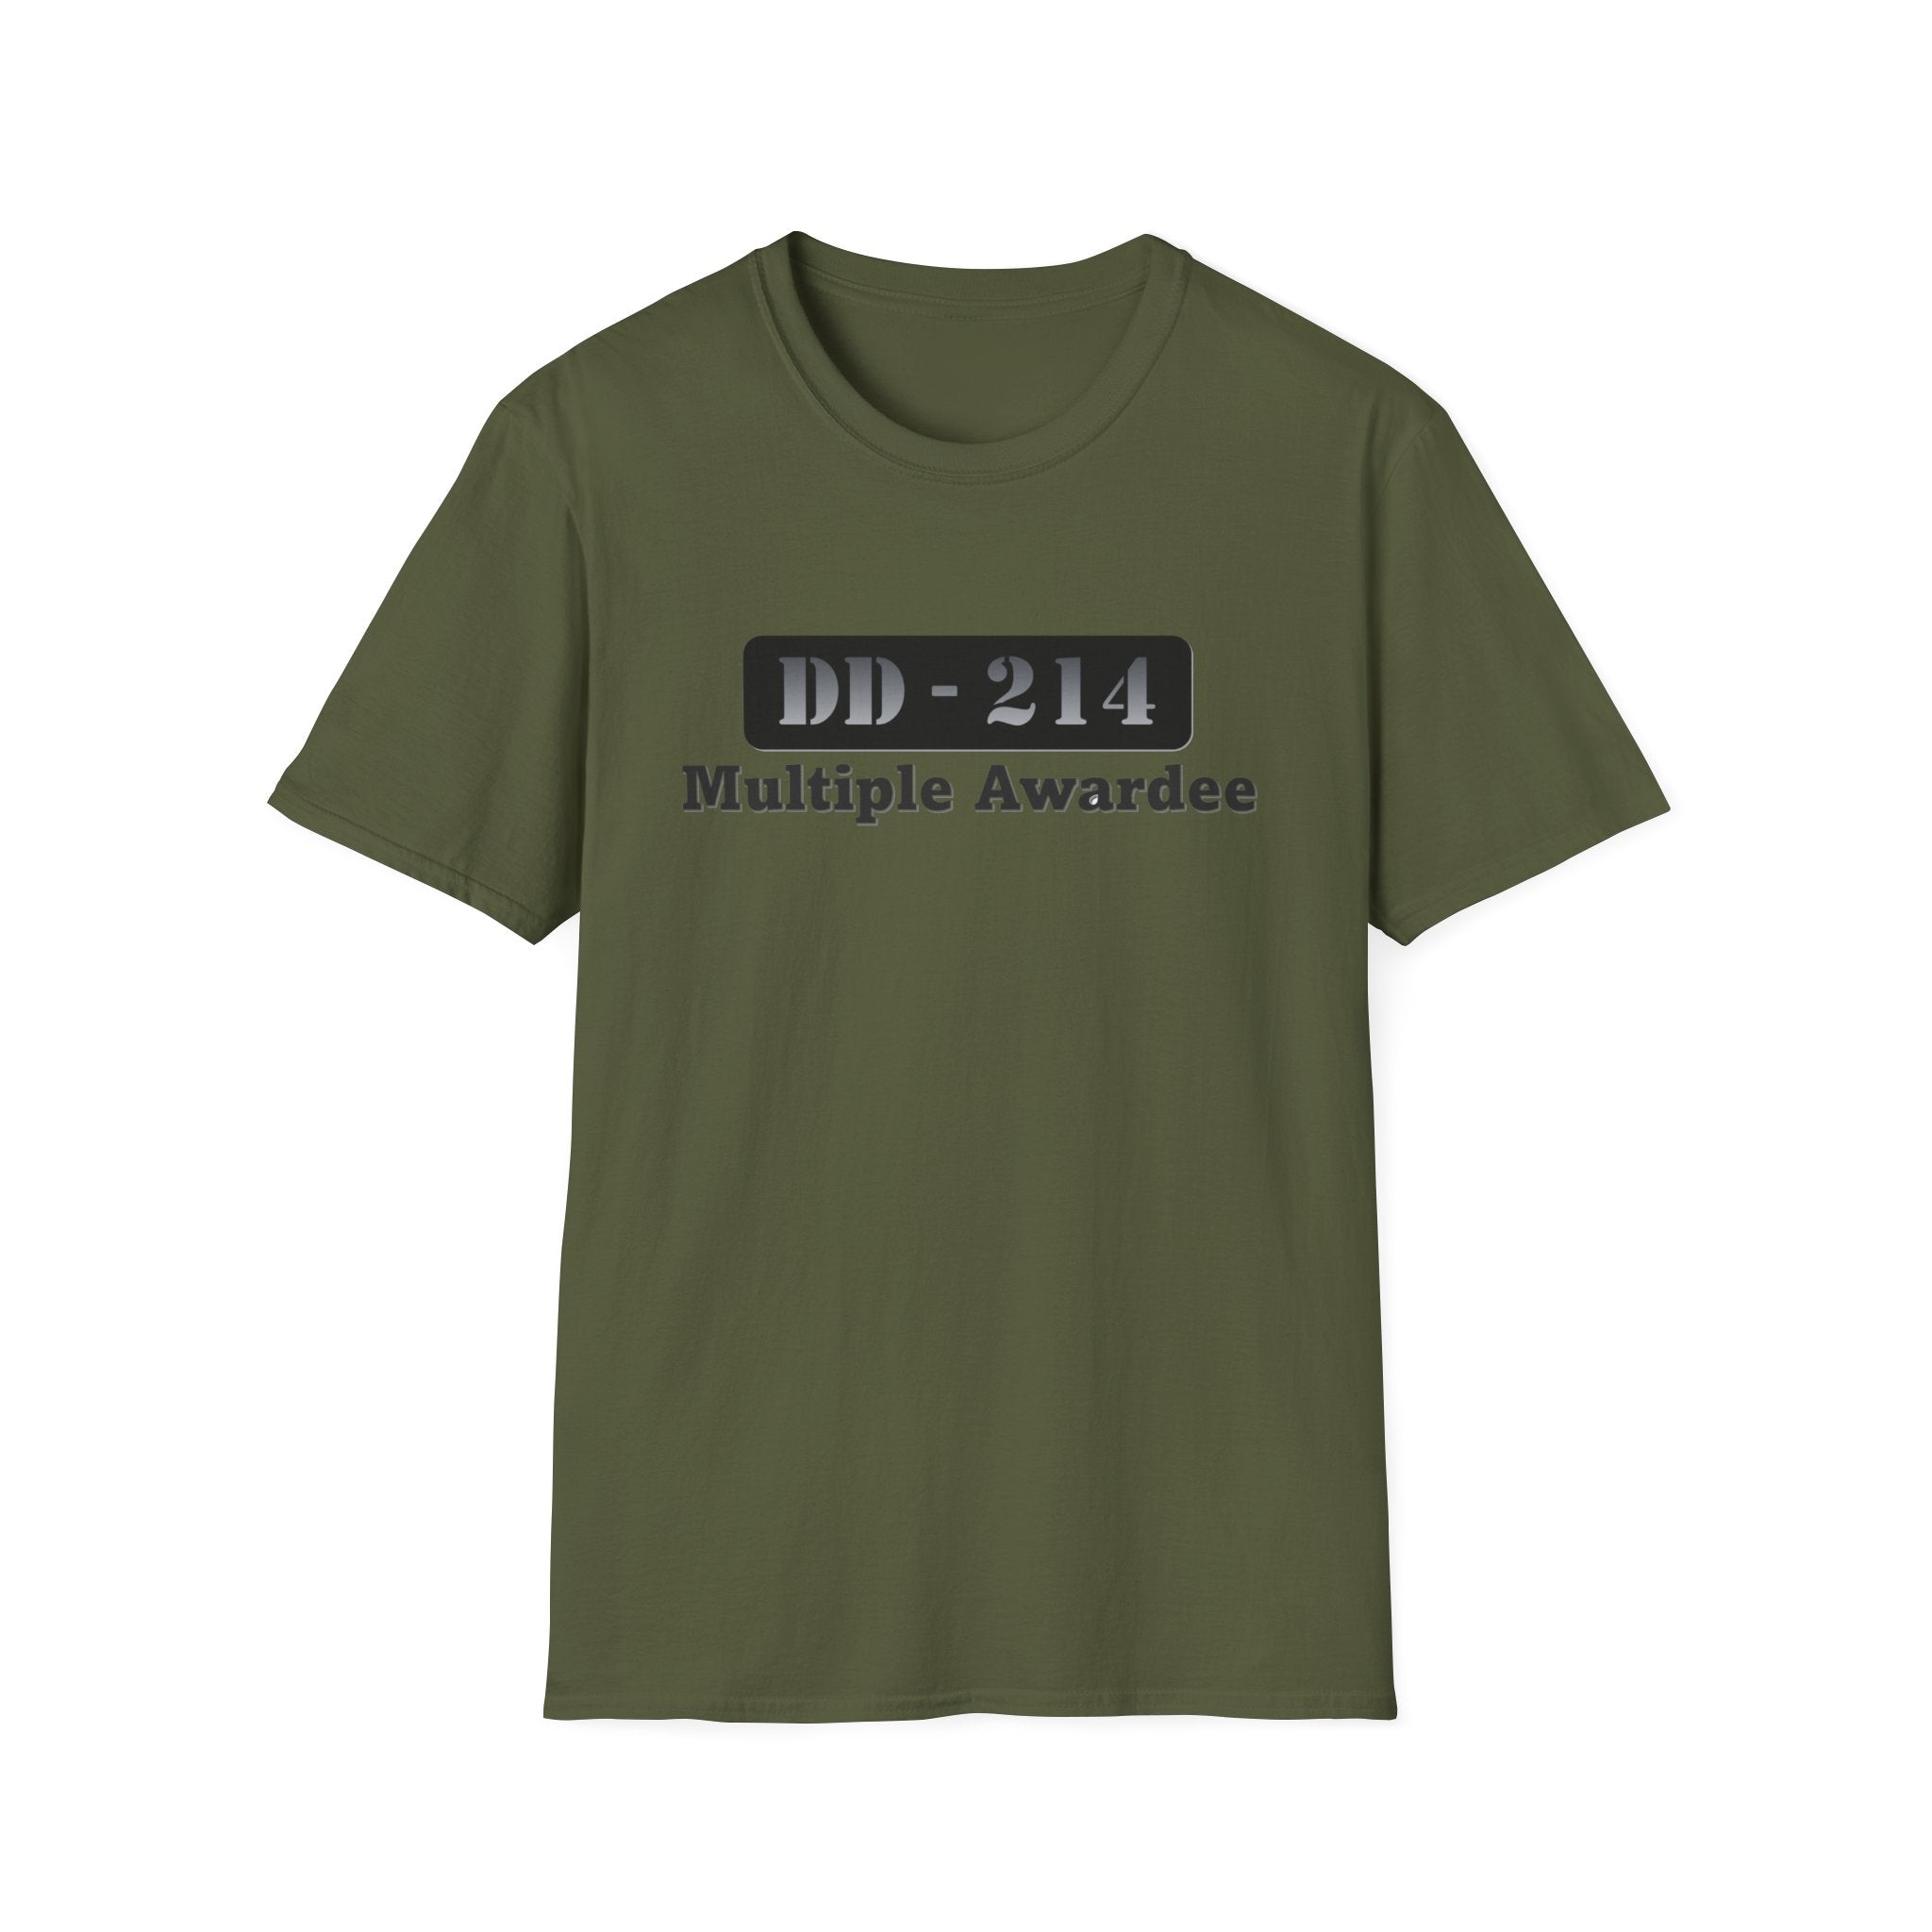 DD-214 Multiple Awardee Tee - I Quit Once, I Can Quit Again